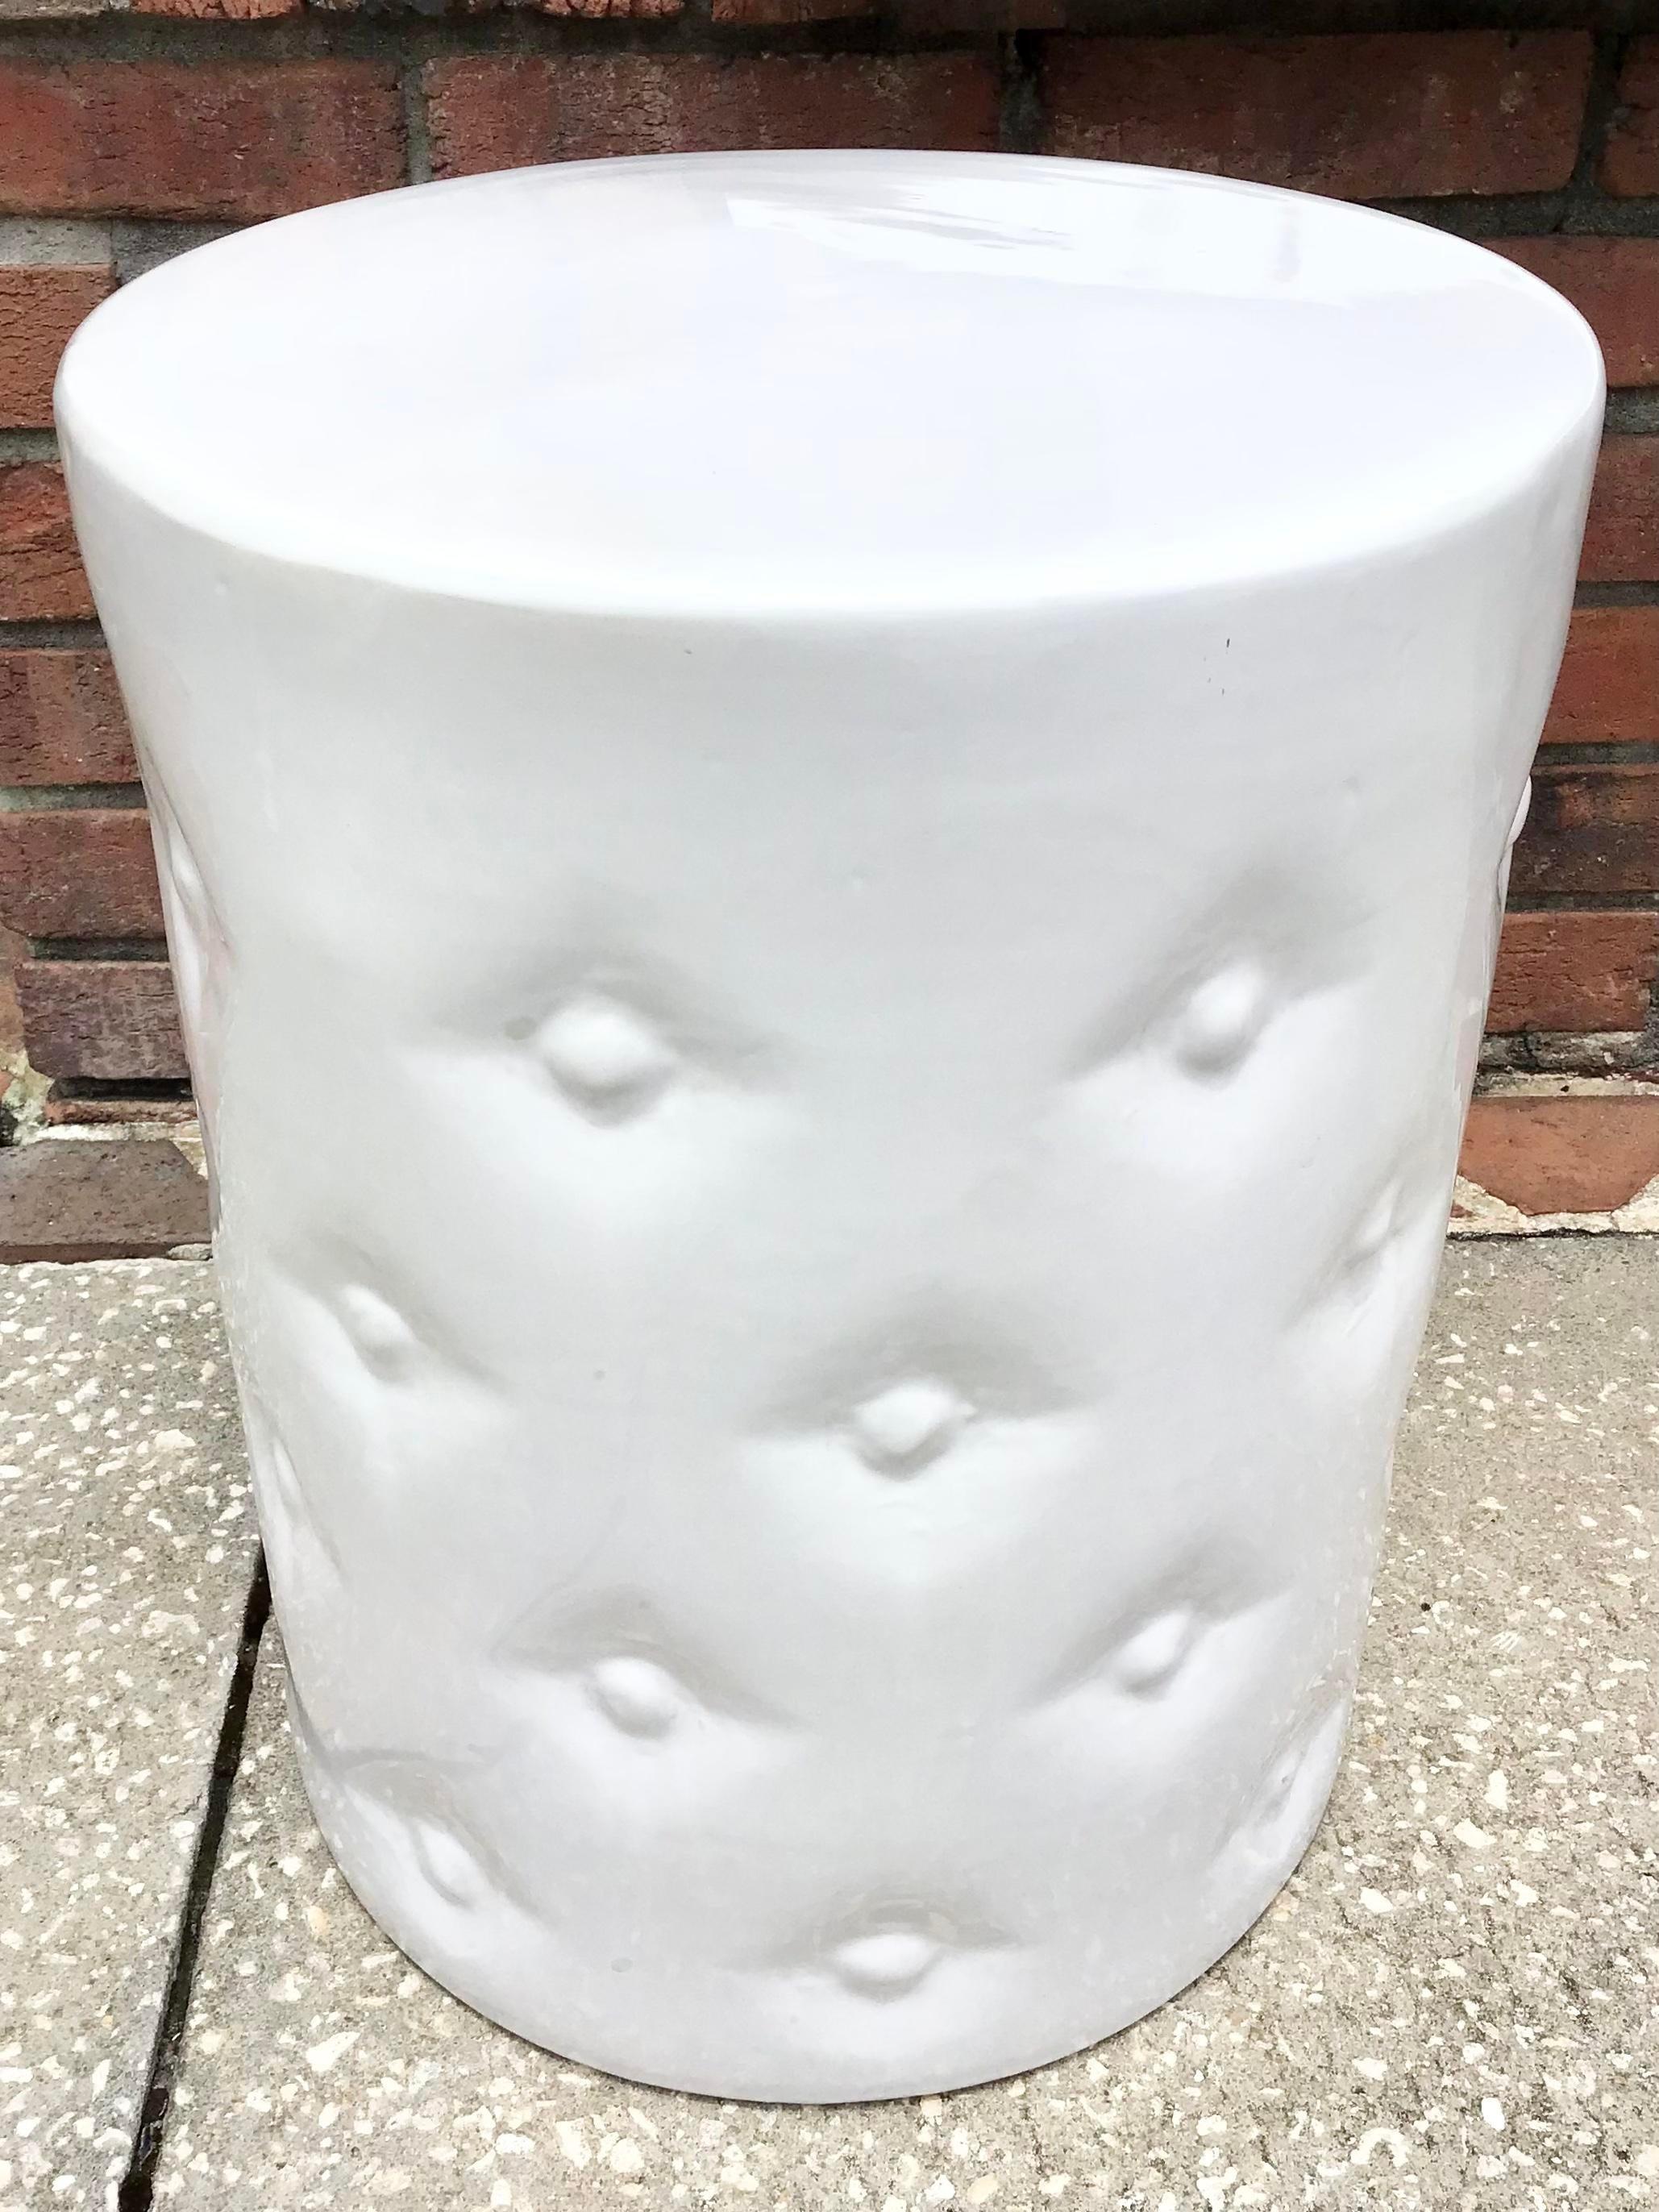 Gorgeous piece of faux cushion white ceramic garden seat in white. This can absolutely function as a cocktail table for your indoors or patio.